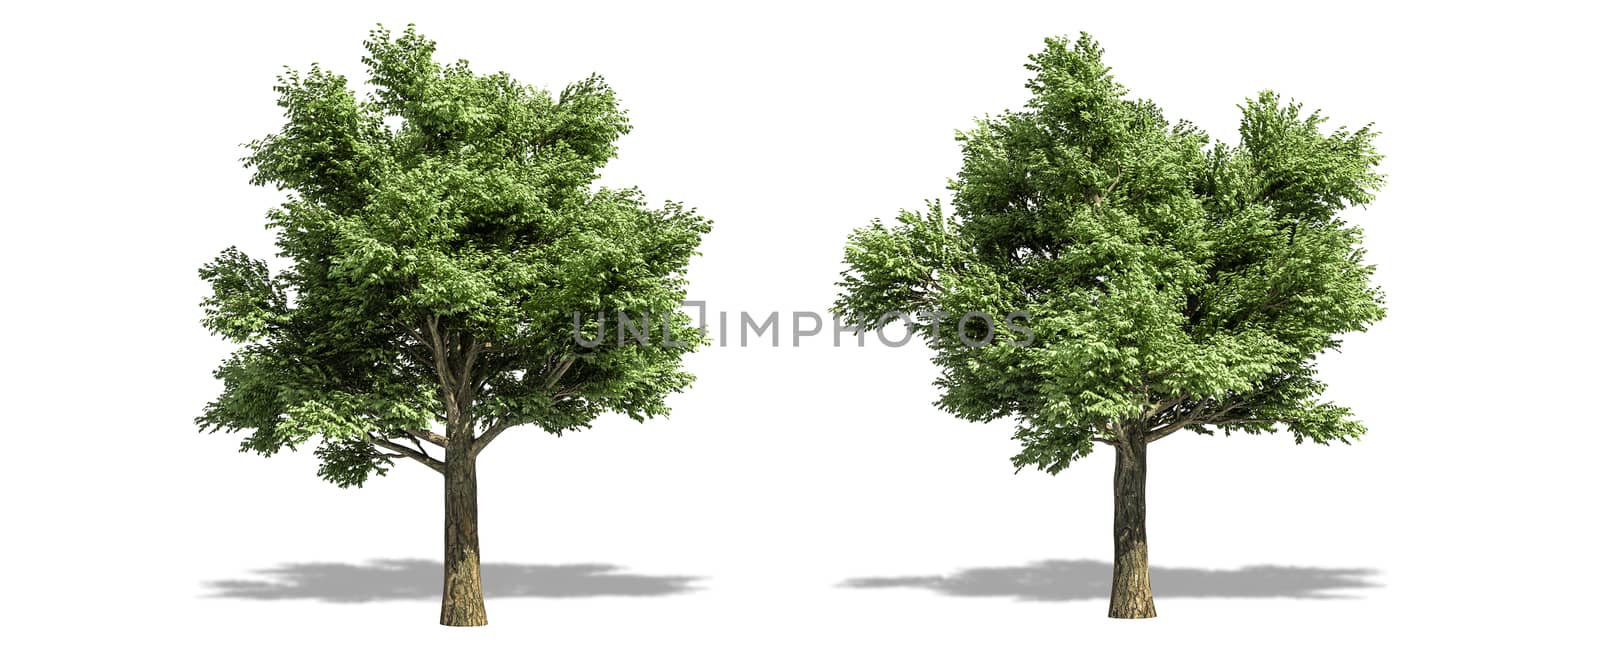 Beautiful Quercus petraea tree isolated and cutting on a white background with clipping path. by anotestocker